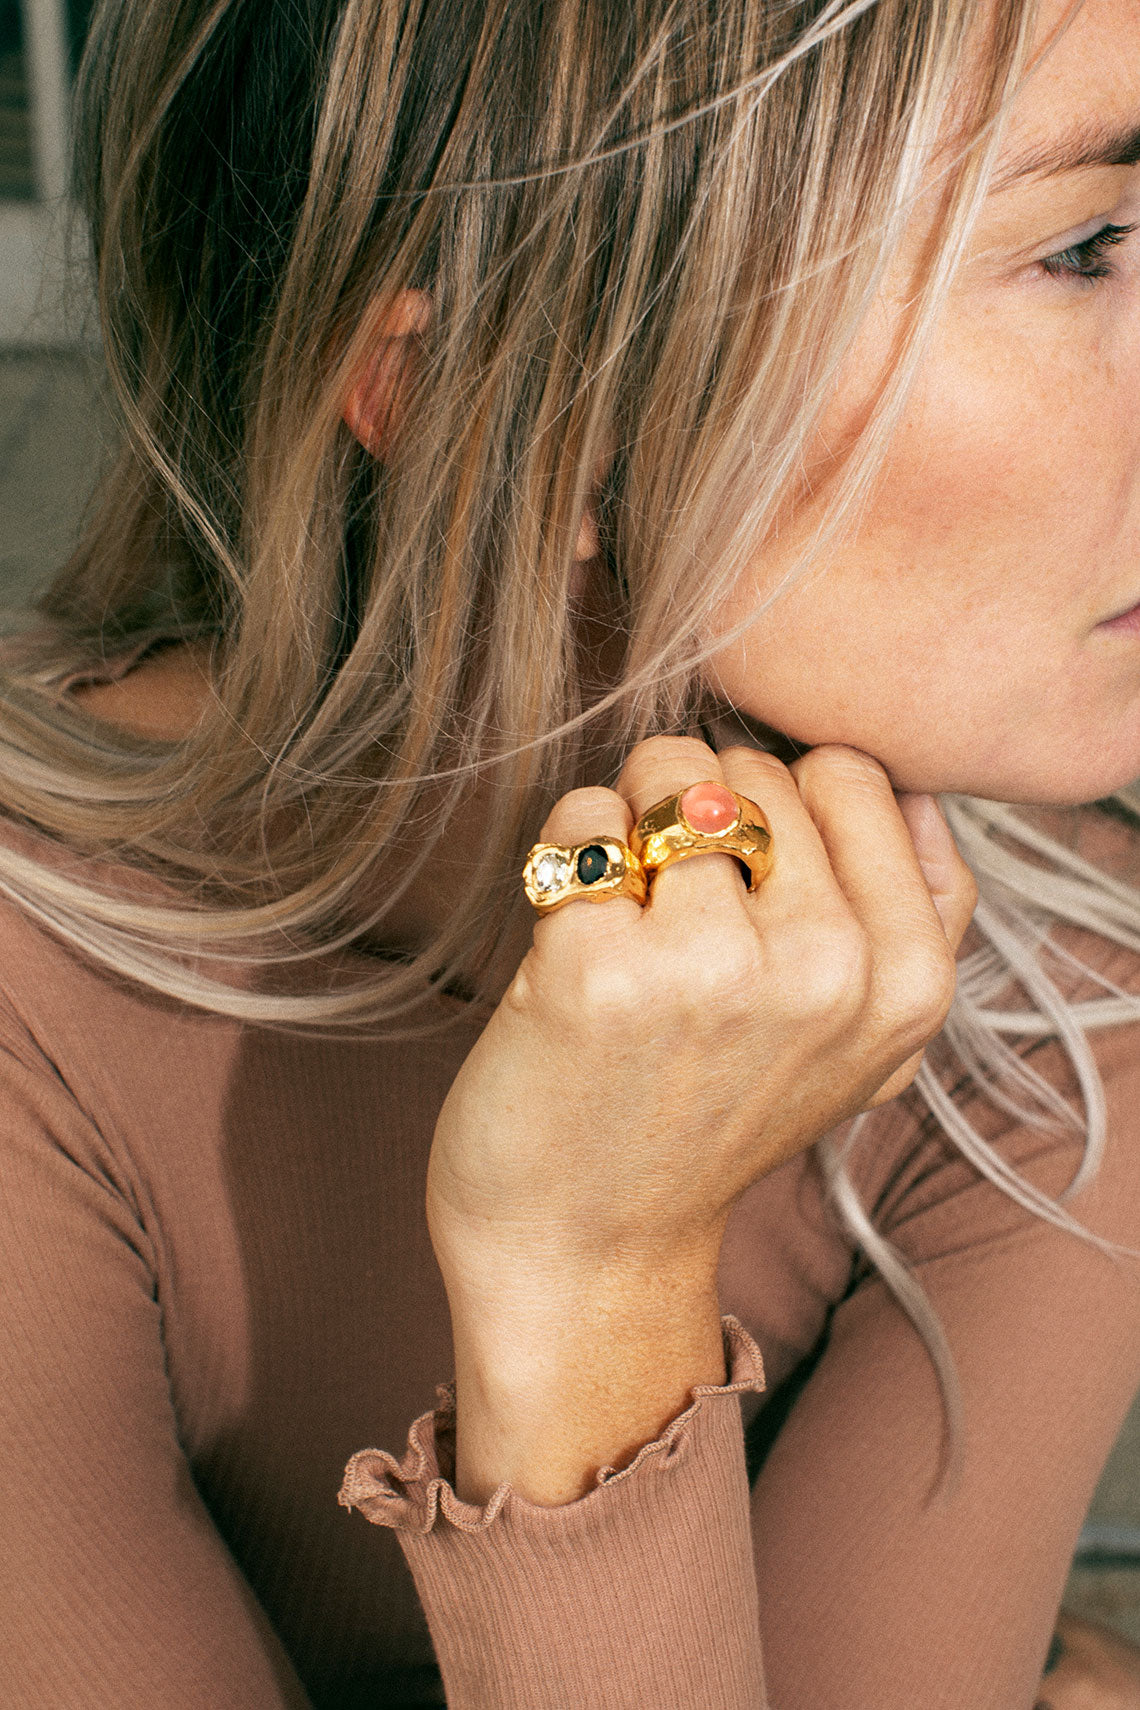 Exclusive Gold Buzo Ring